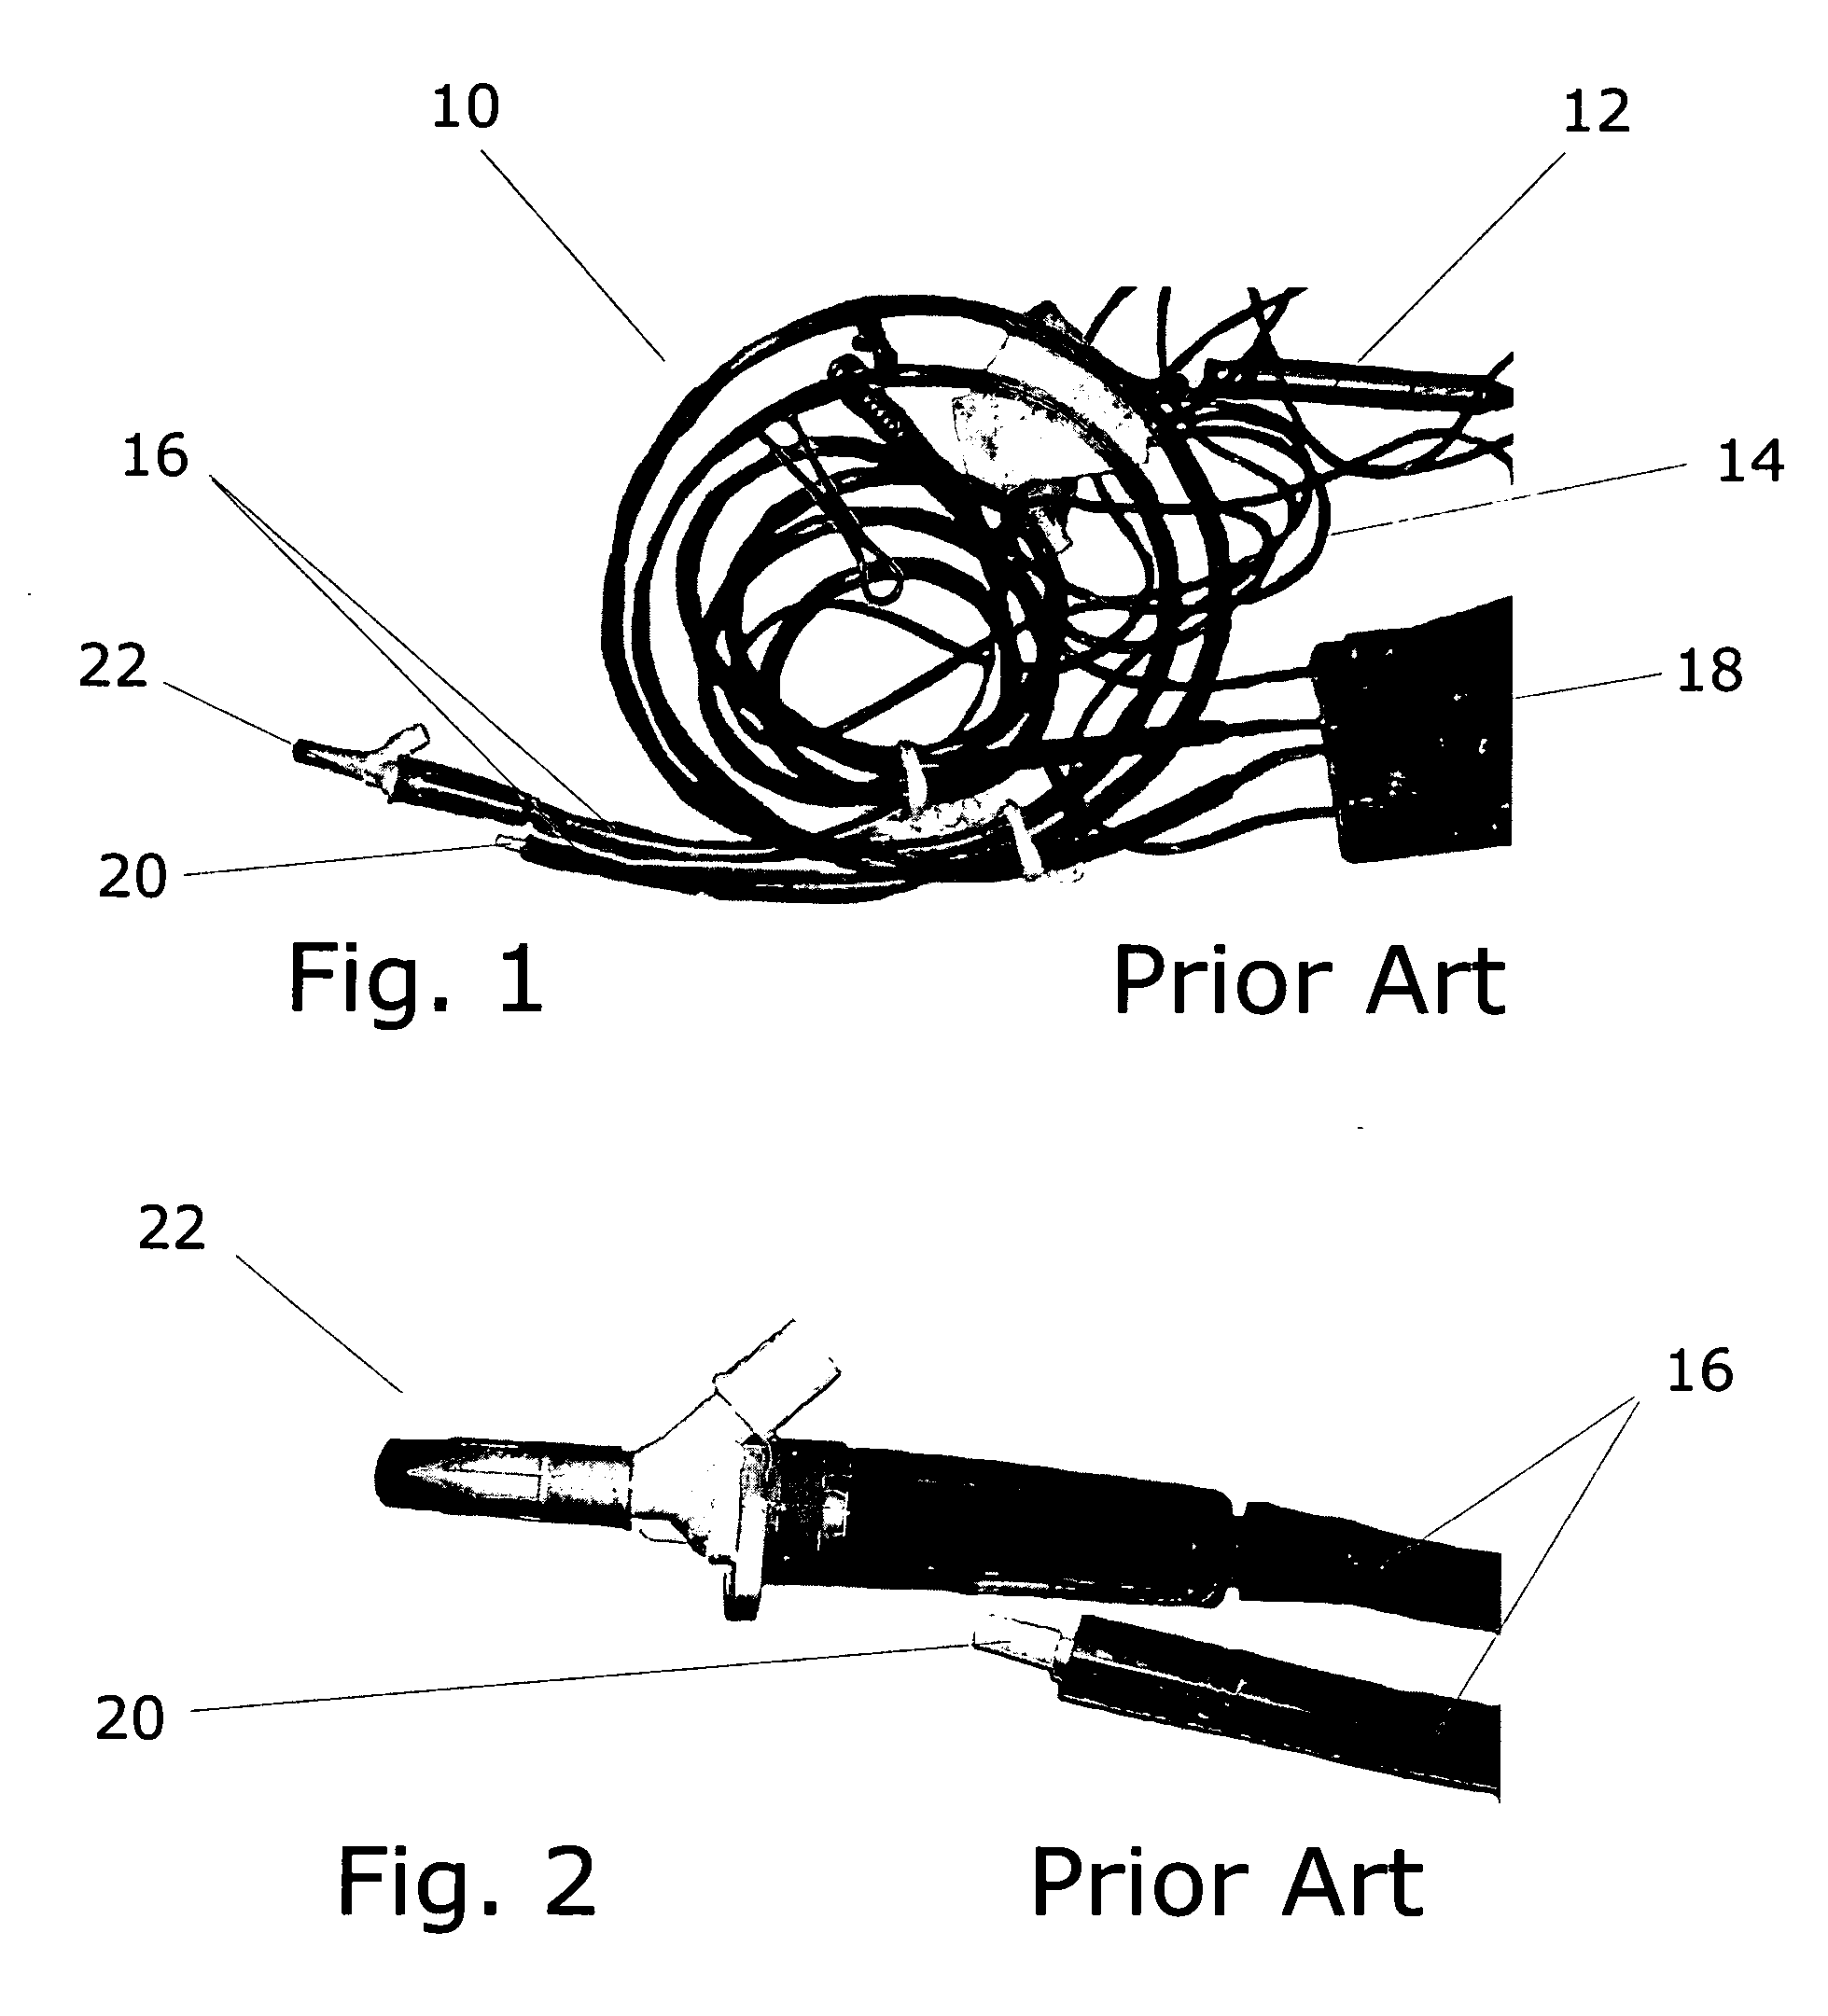 Coaxial tubing system for phacoemulsification handpieces